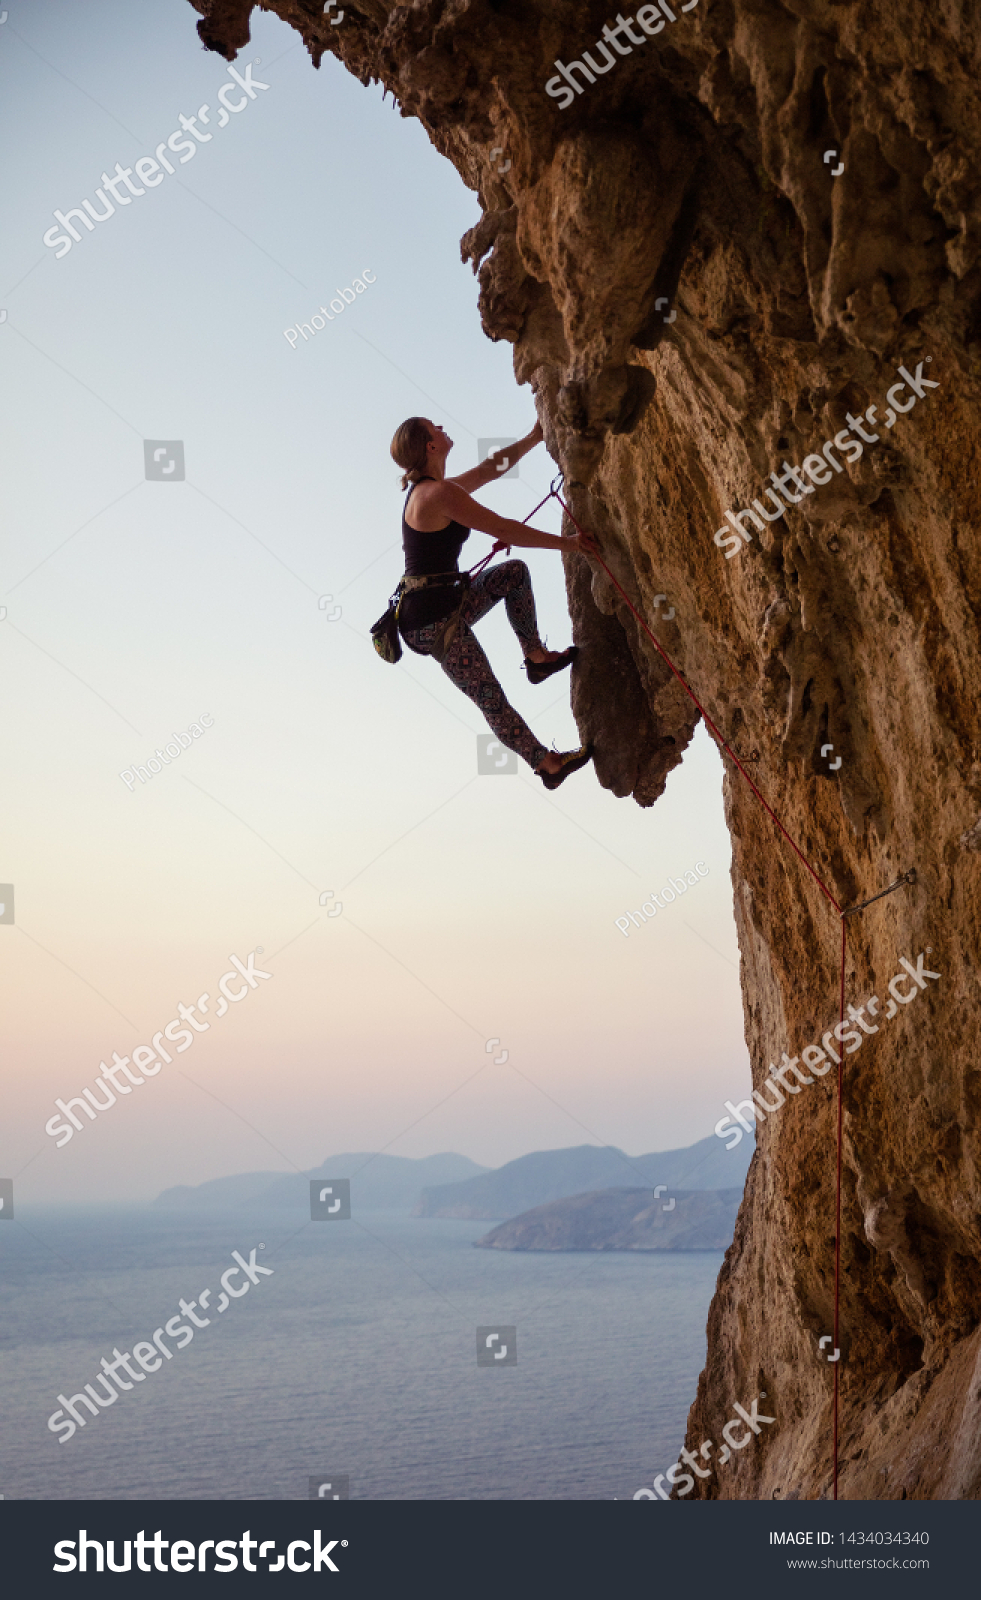 Young woman climbing challenging route at sunset #1434034340